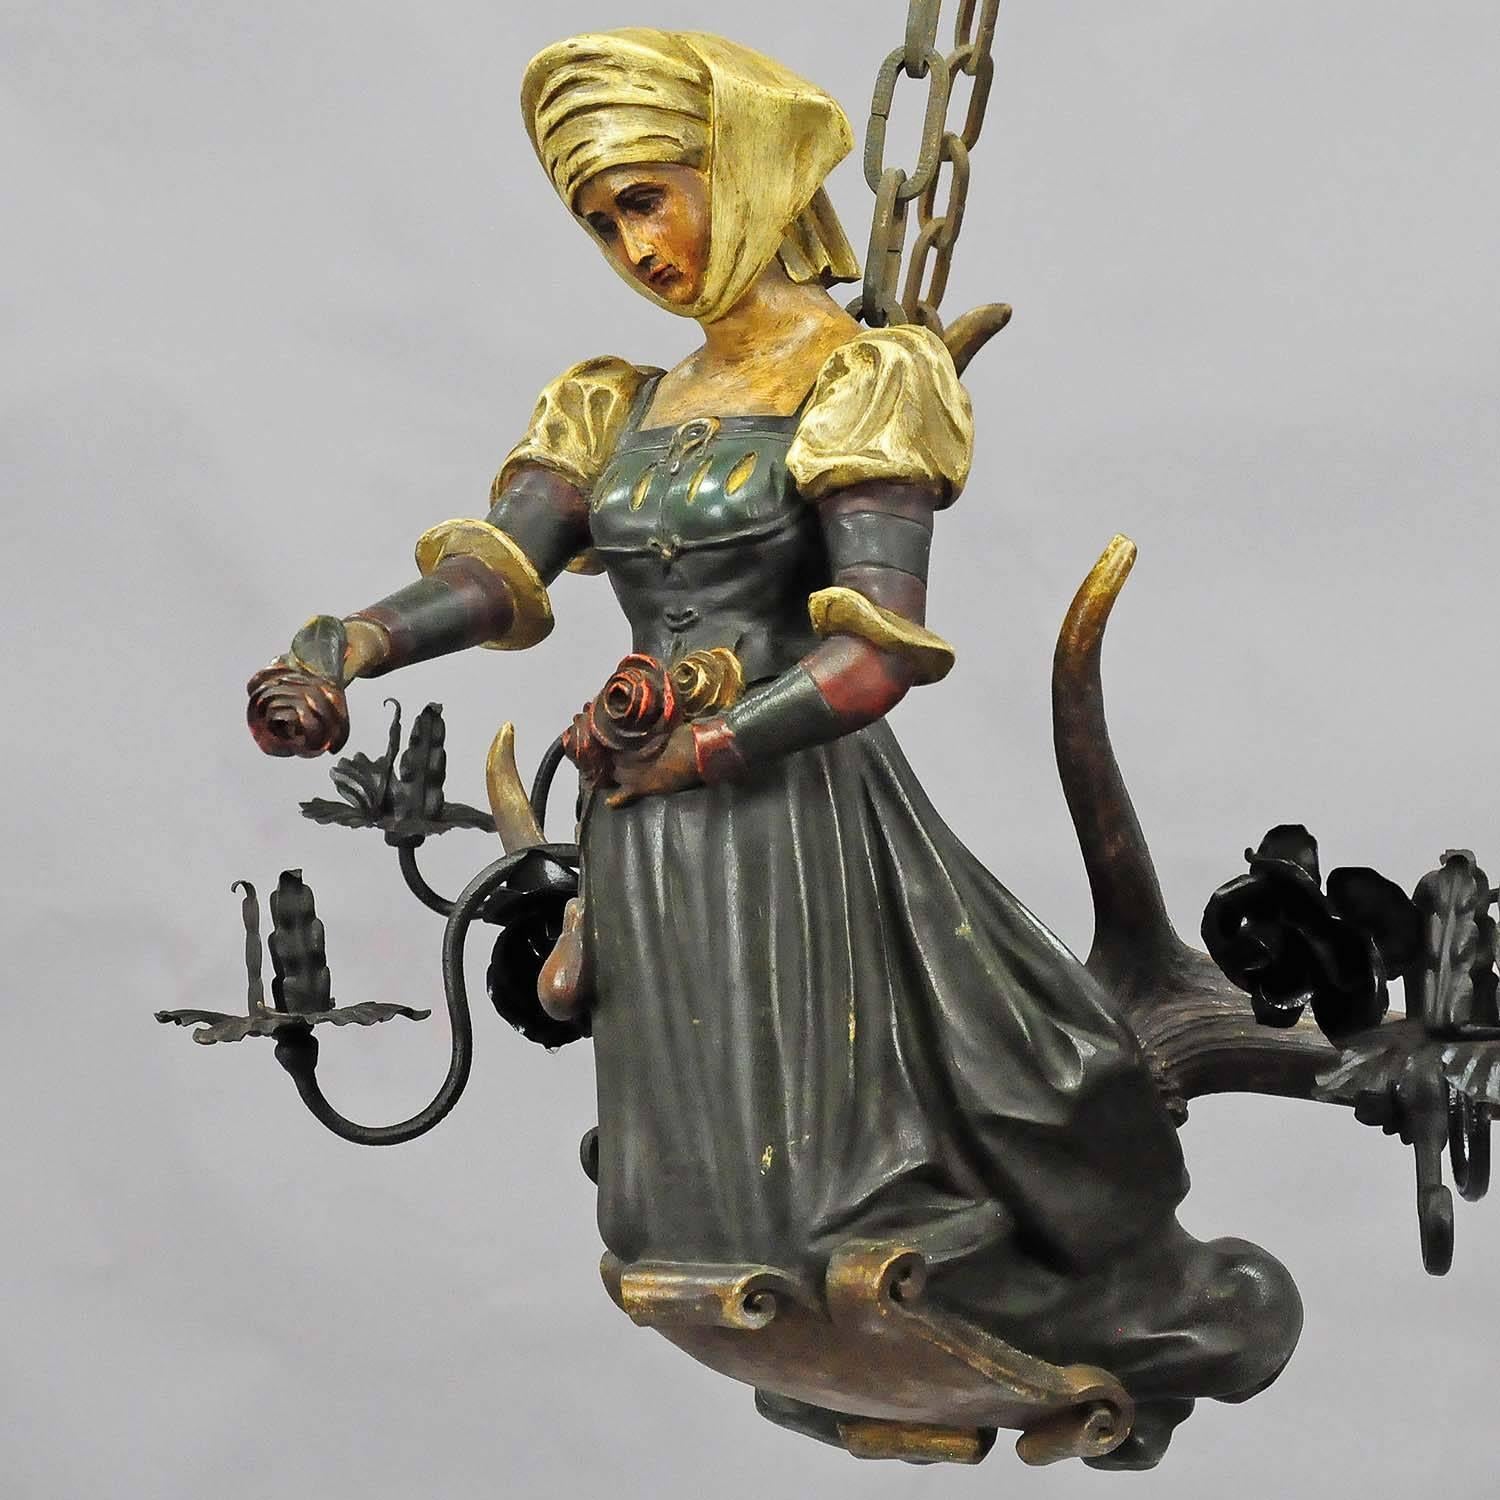 An antique lusterweibchen statue of a rose maid - made of hand-carved wood. Mounted on a pair of original fallow deer antlers with four hand-forged iron candleholders in the shape of rose blossoms. Executed circa 1890. Measures:  Height figure only